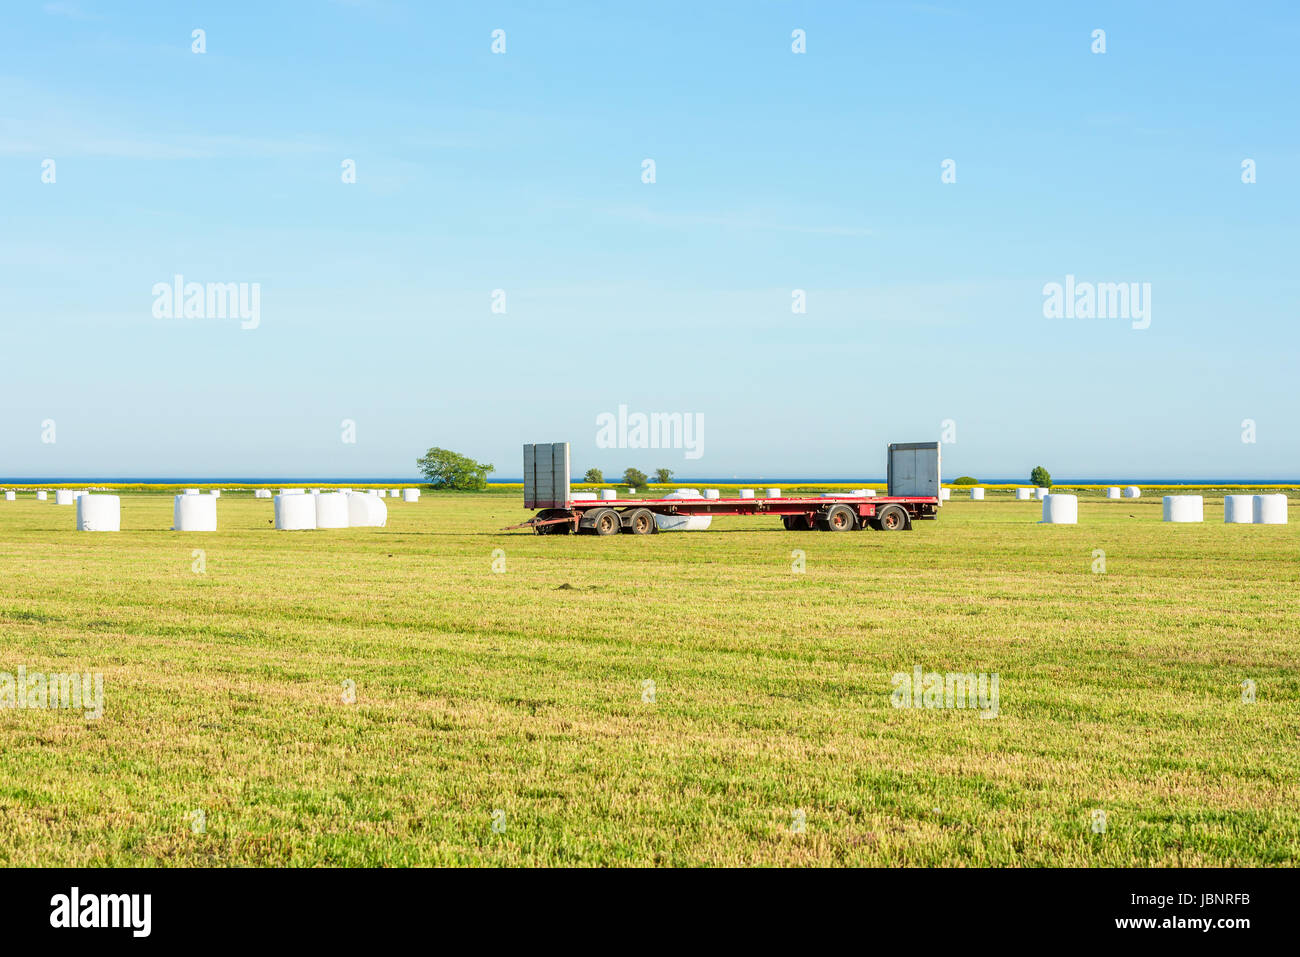 Empty truck trailer parked in a field full of silage bales. The bales are to be loaded on the trailer for later transport. Stock Photo